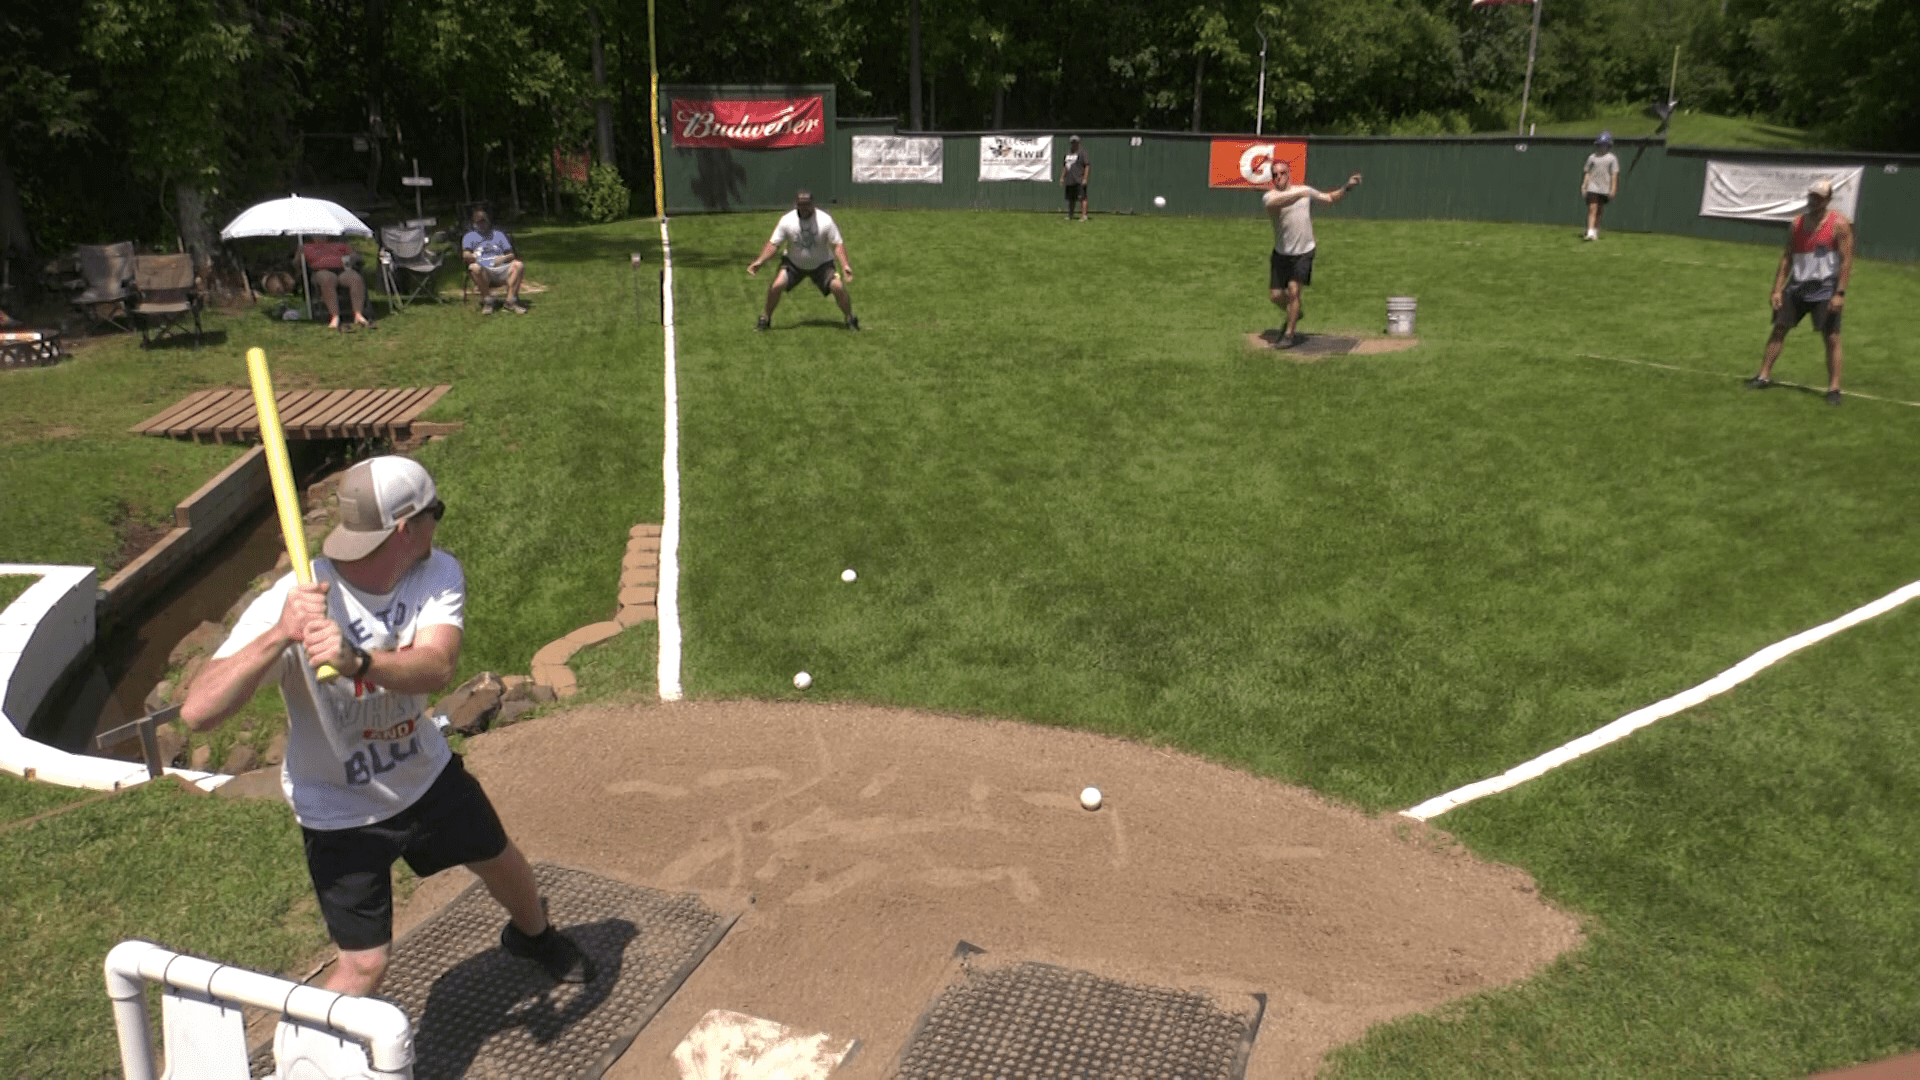 Last pitch thrown at 9th year of Alzheimer awareness Wiffleball tournament